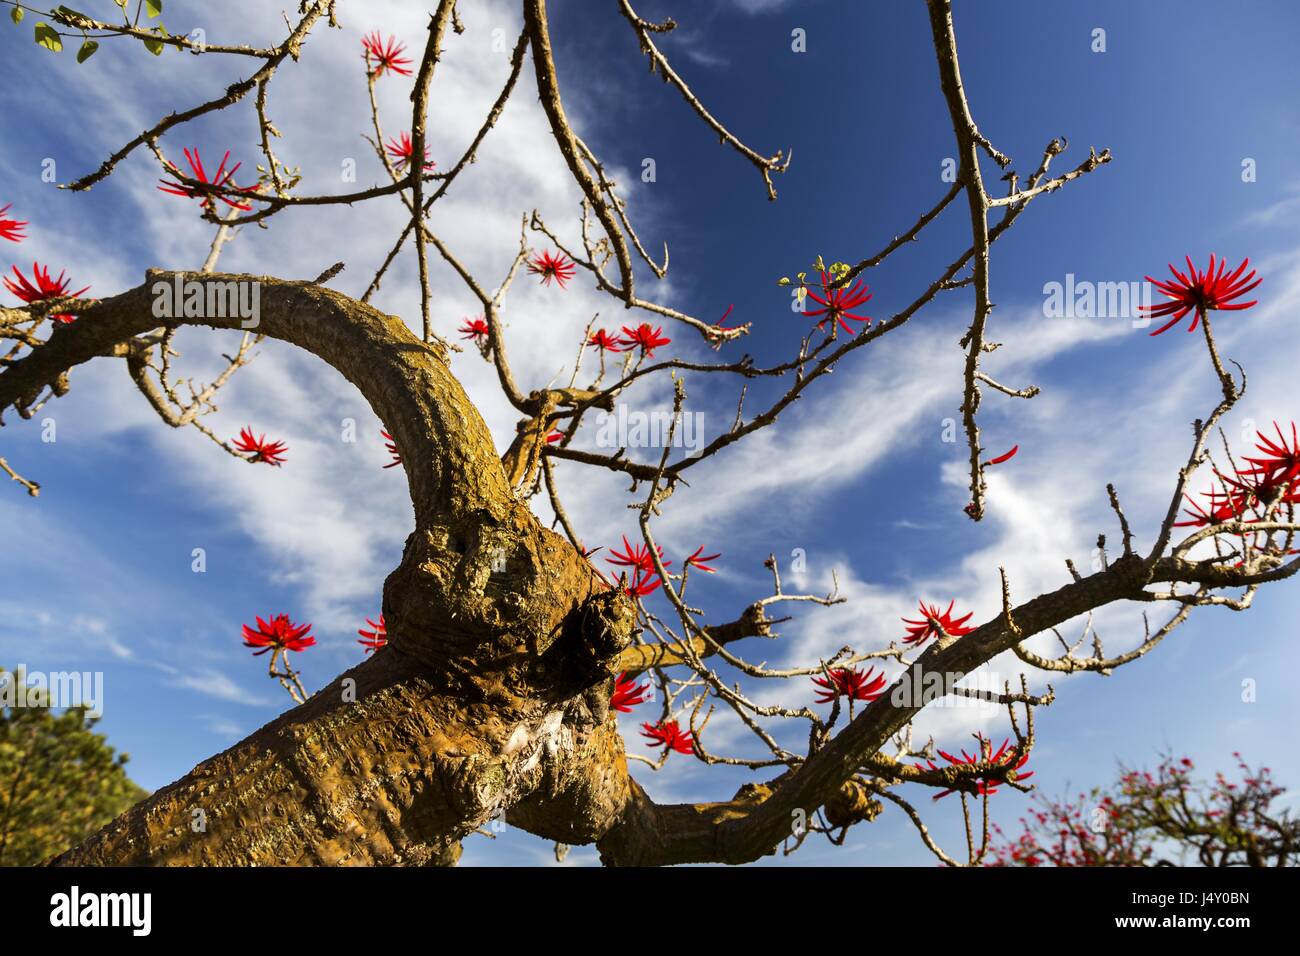 Erythrina Flabelliformis also known as Chilicote or Western Coral Bean Desert Flower Tree Blooming in Southern California against Blue Sky Background Stock Photo